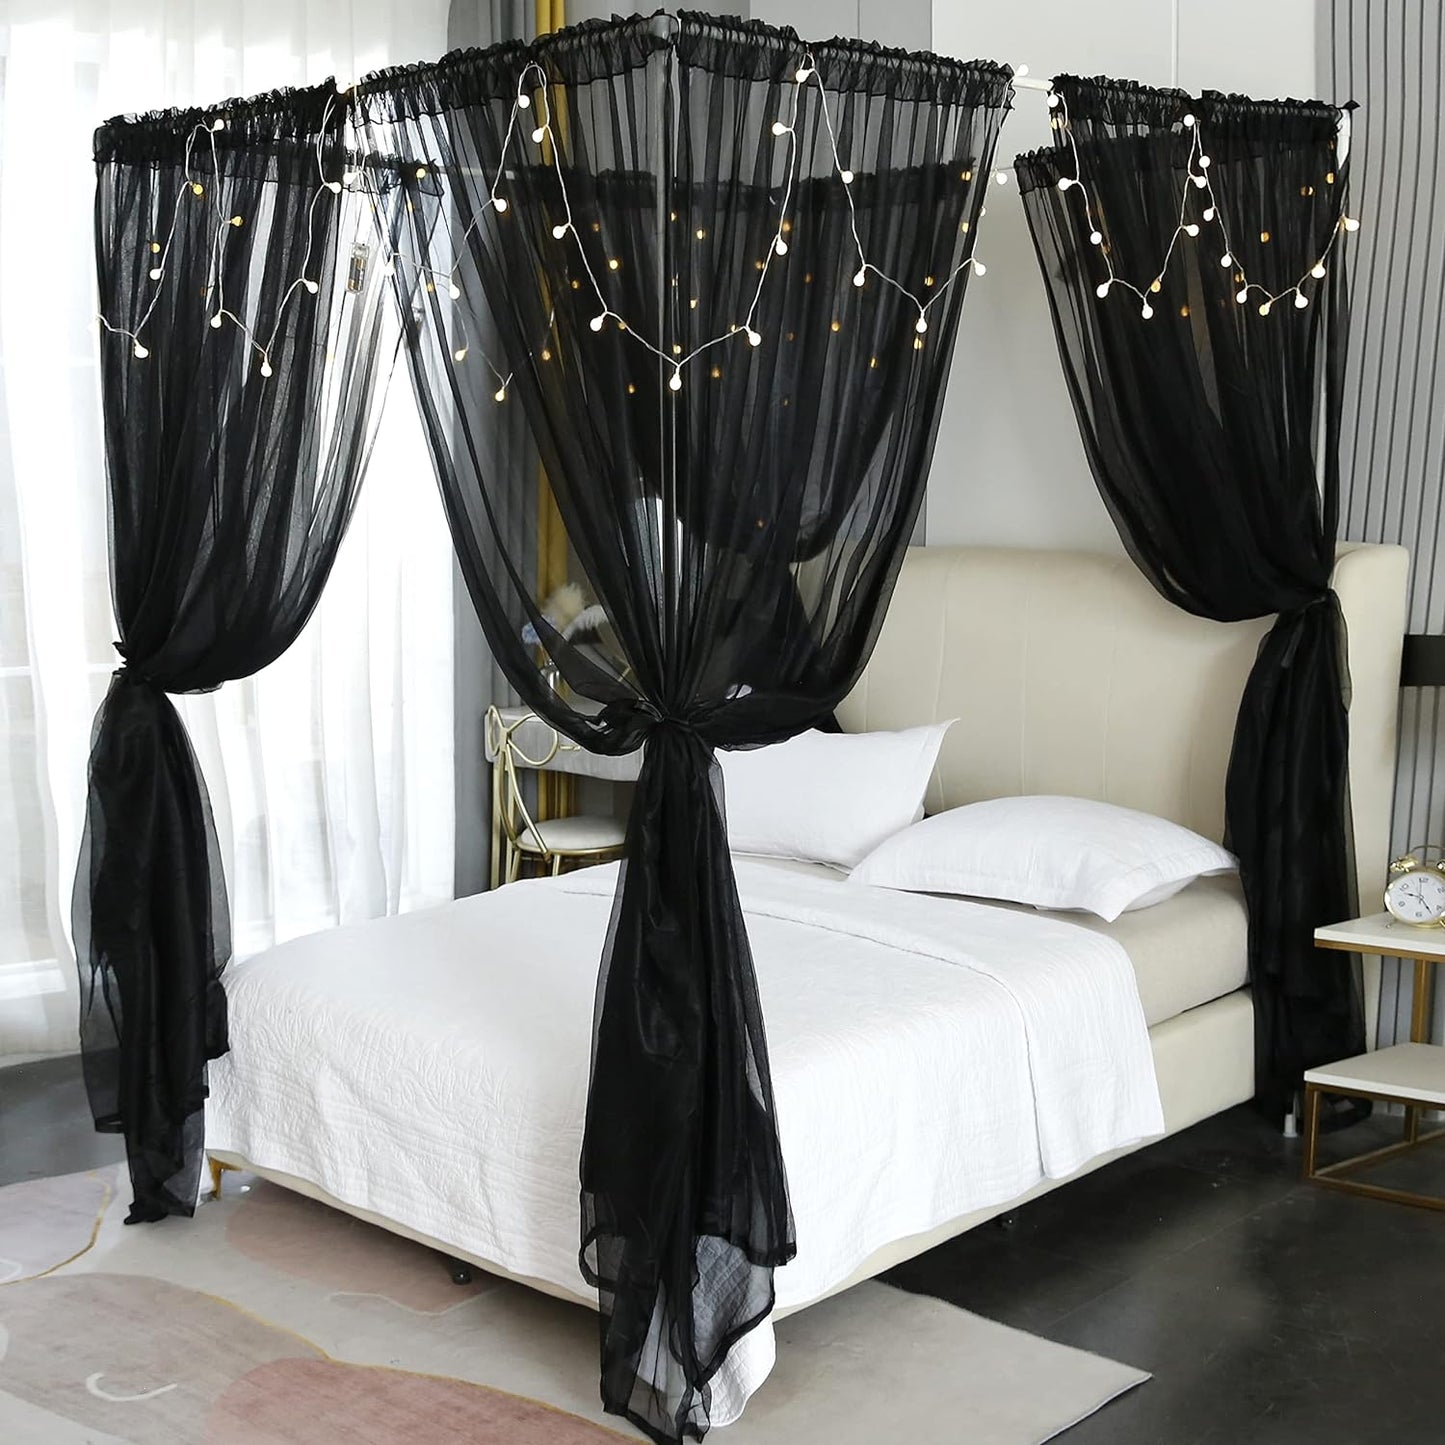 Akiky Princess Canopy Bed Curtains Bed Canopy Curtains with Lights for Queen Size Bed Drapes,8 Panels Canopies with 2 Lights,Room Décor (Full/Queen, White)  Akiky Black Full/Queen 